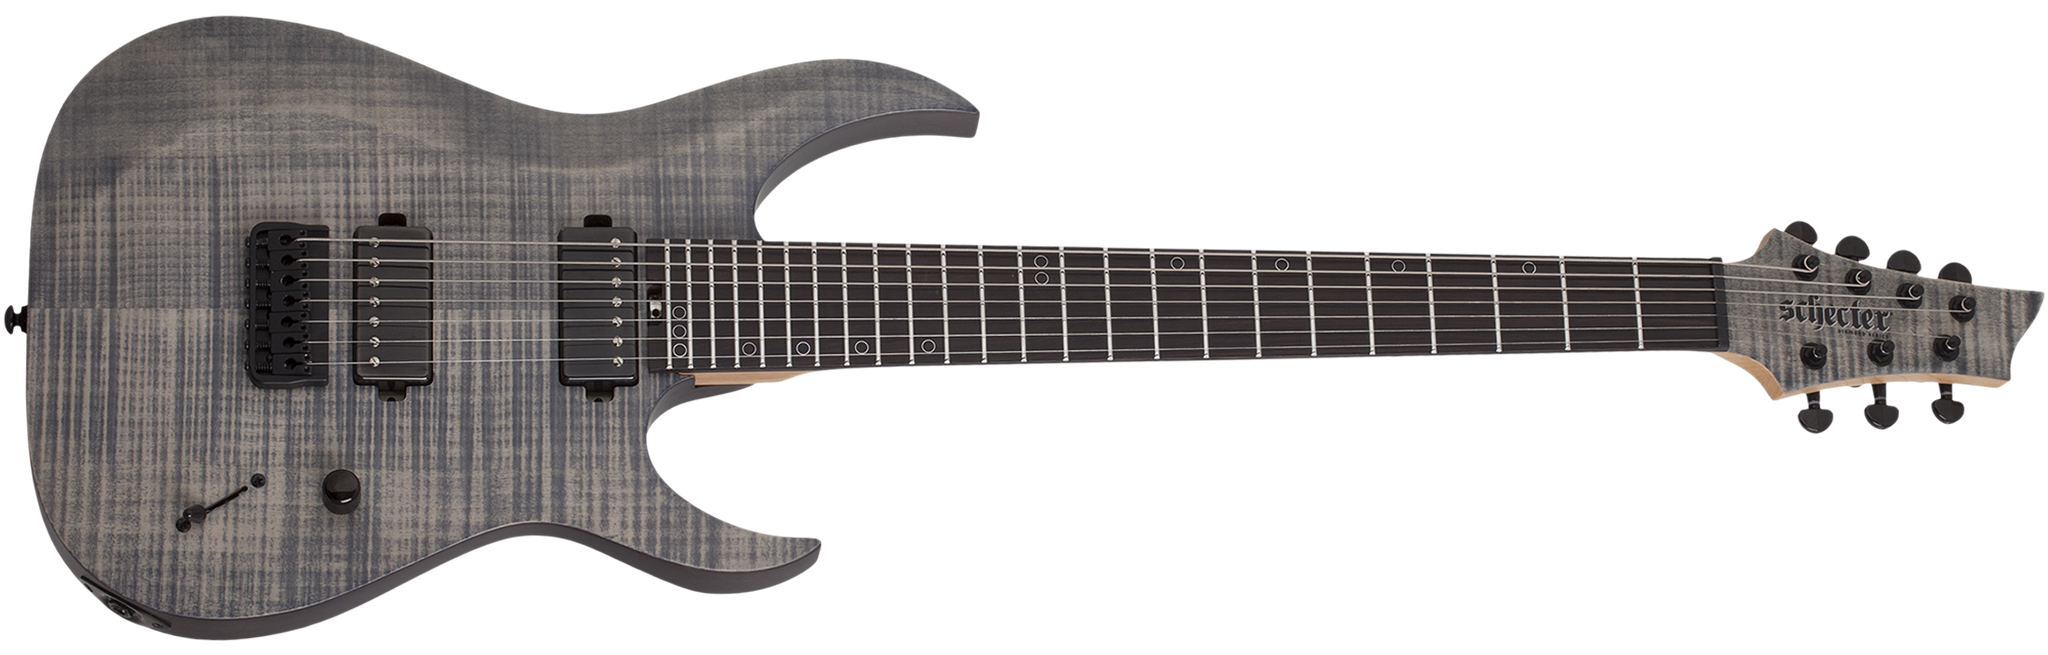 Schecter DIAMOND SERIES Sunset-7 Extreme Grey Ghost 7-String Electric Guitar